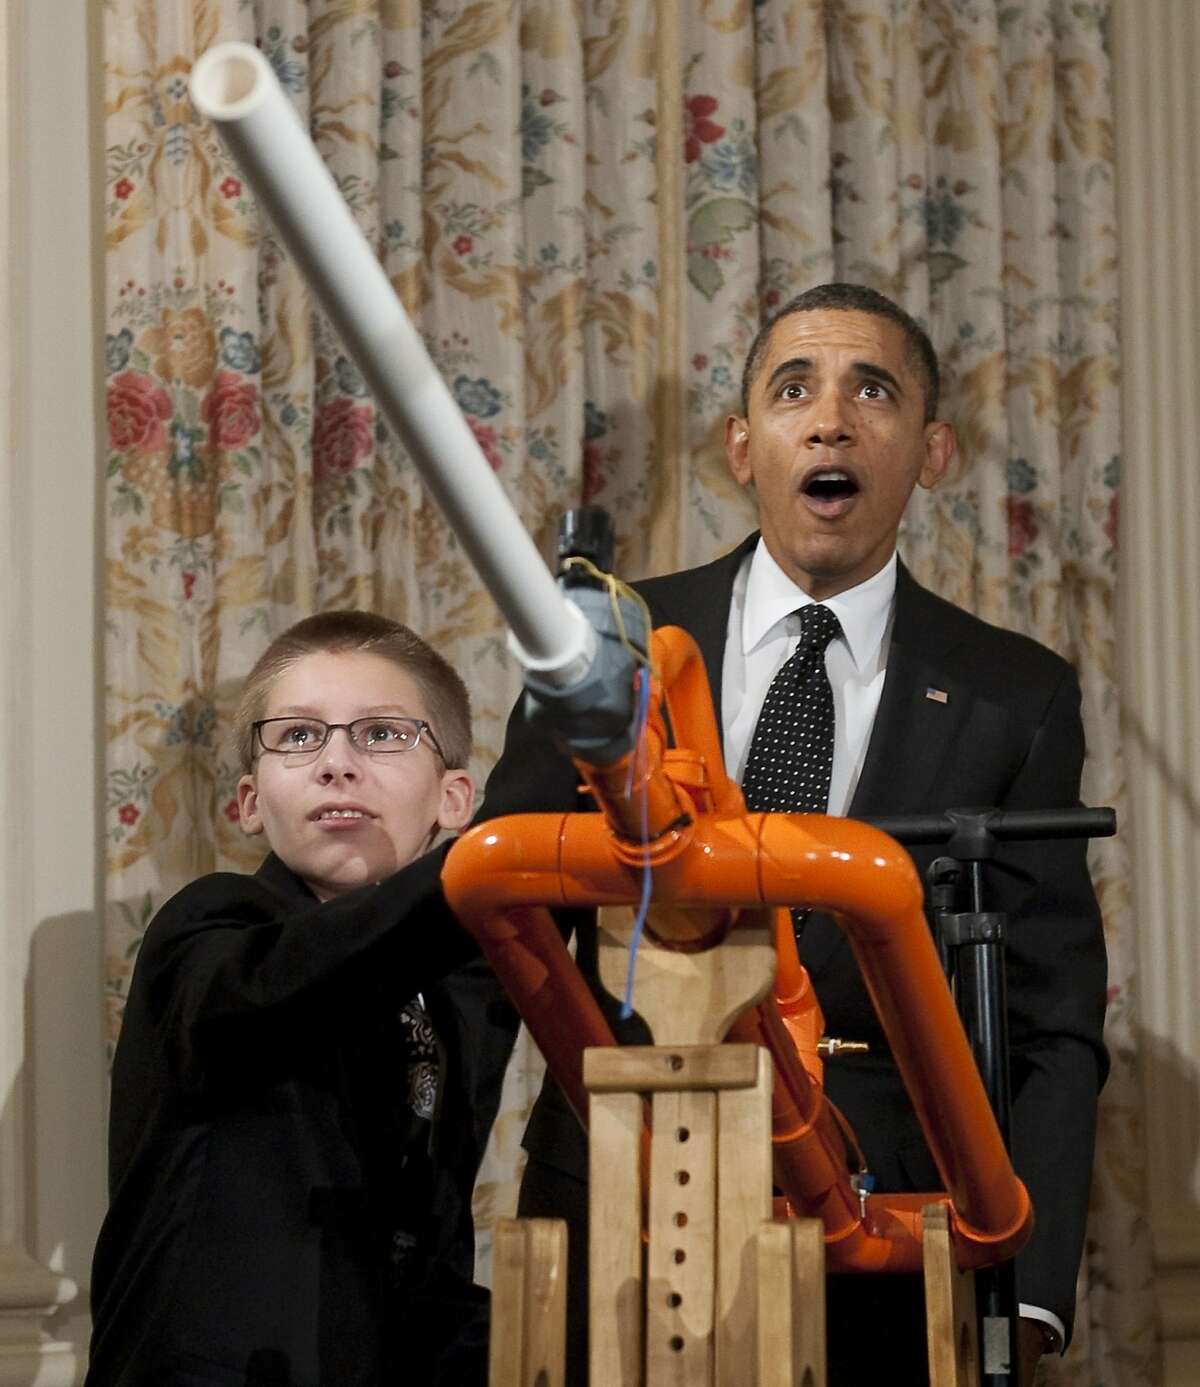 US President Barack Obama reacts as 14-year-old Joey Hudy of Phoenix, Arizona, launches a marshmallow from Hudy's "Extreme Marshmallow Cannon" during a tour of the White House Science Fair in the State Dining Room of the White House in Washington, DC, February 7, 2012. Obama announced new policies to recruit and support science, technology, engineering and math (STEM) teacher programs, including requesting $80 million in his upcoming budget for teacher preparation, with the goal of training one million additional STEM students over the next decade.